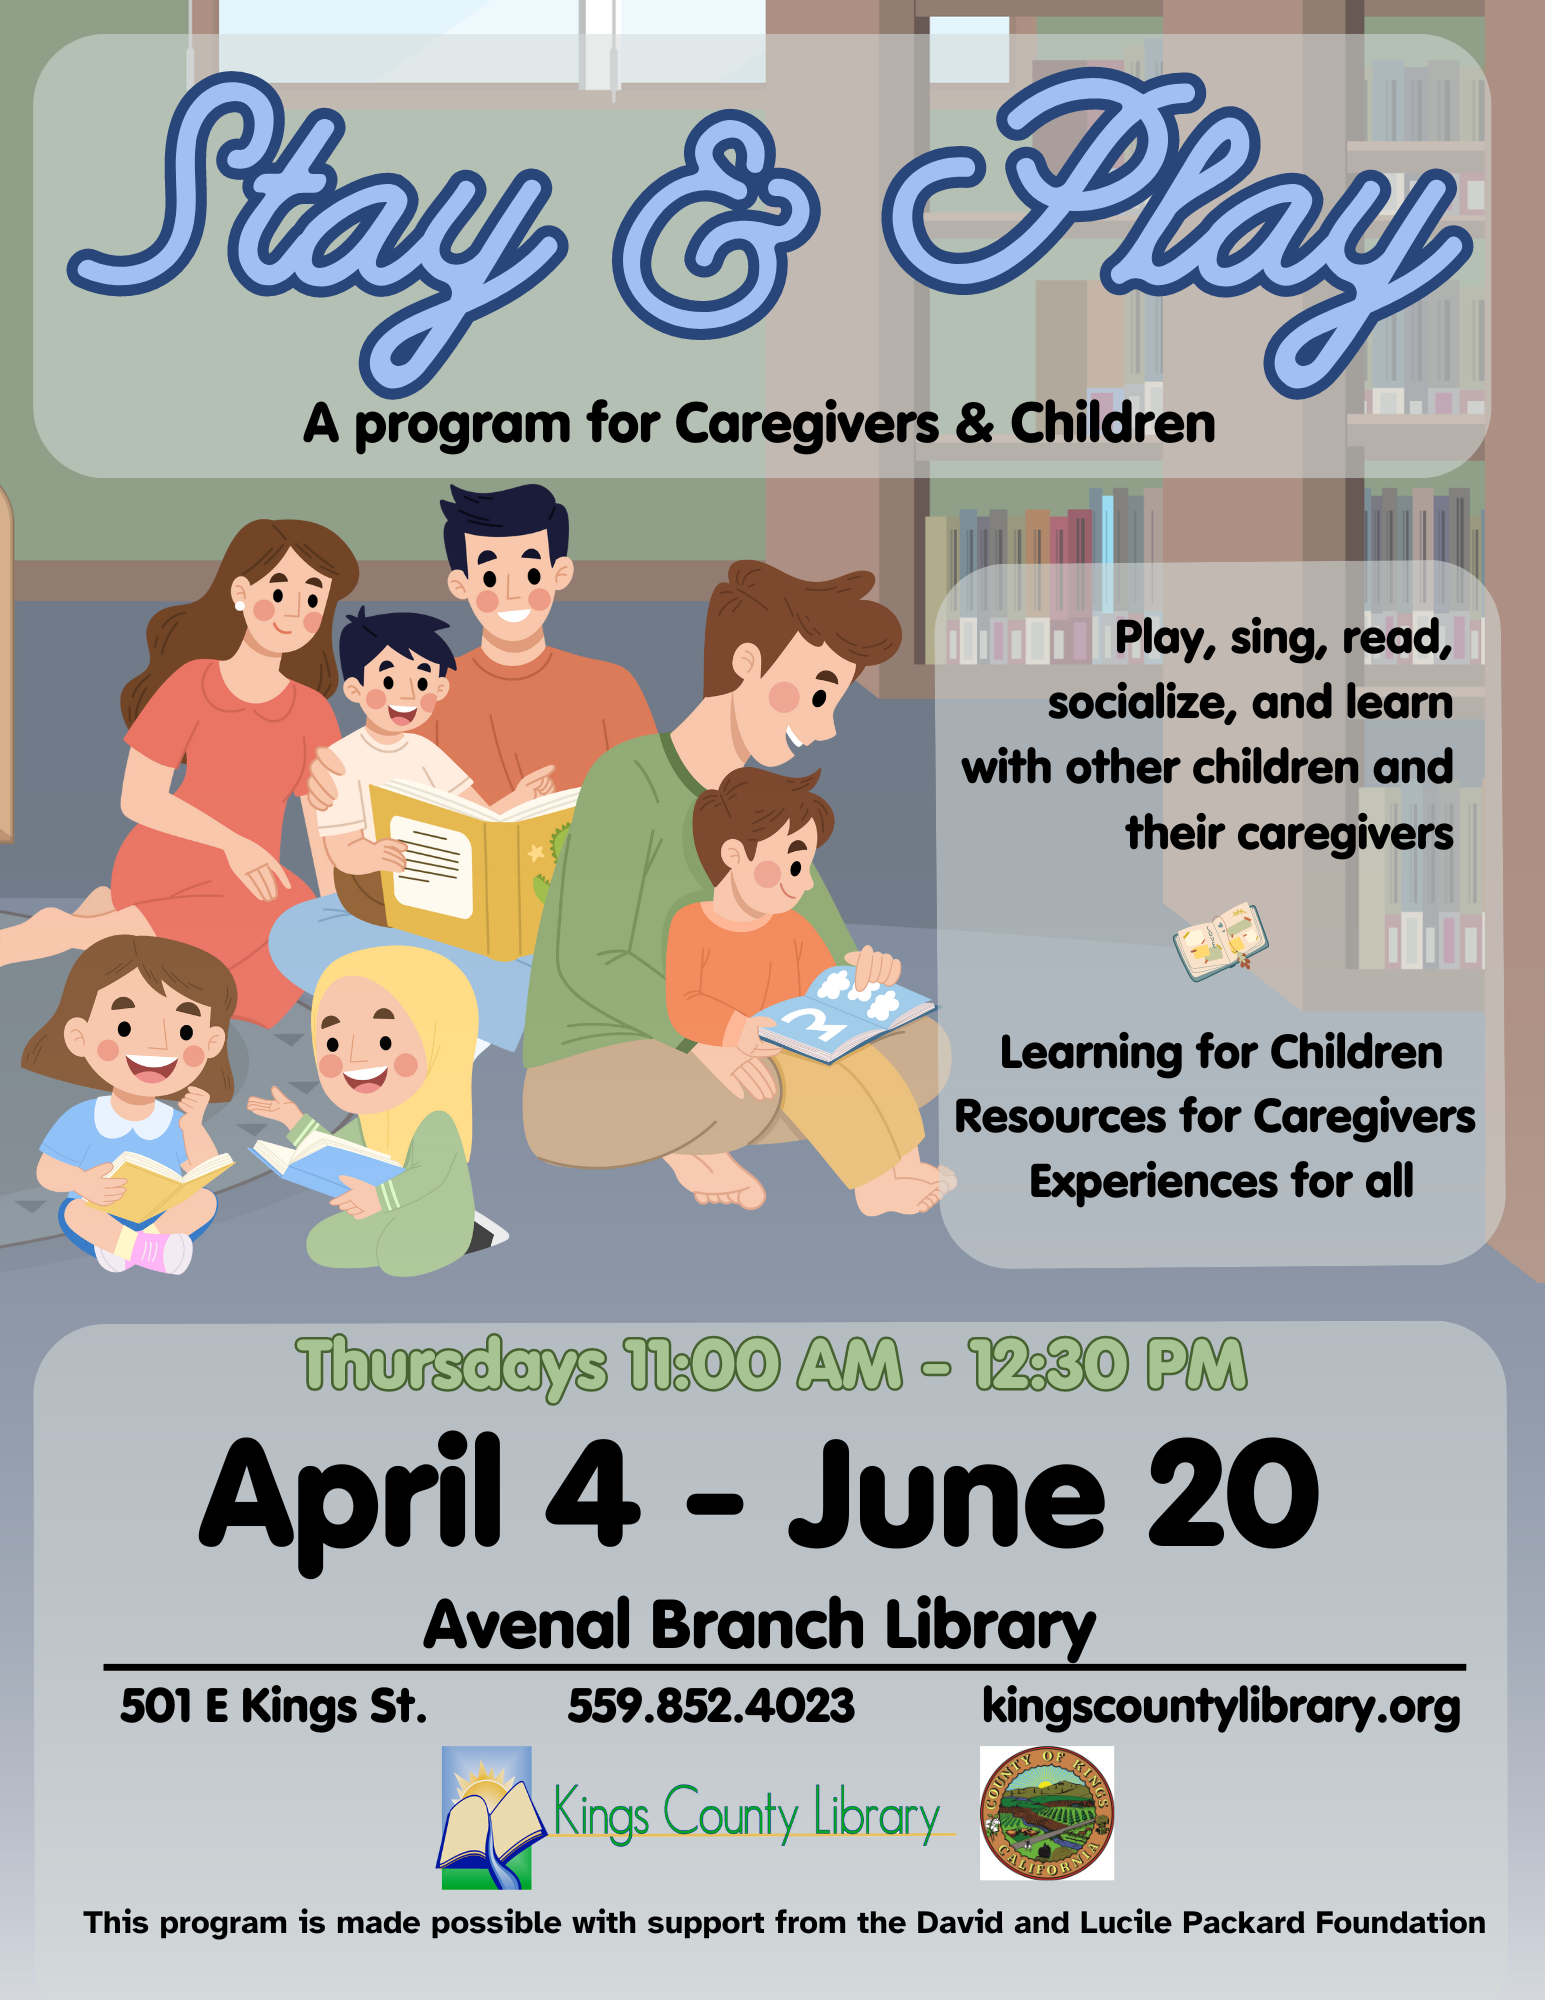 Avenal Library Stay & Play